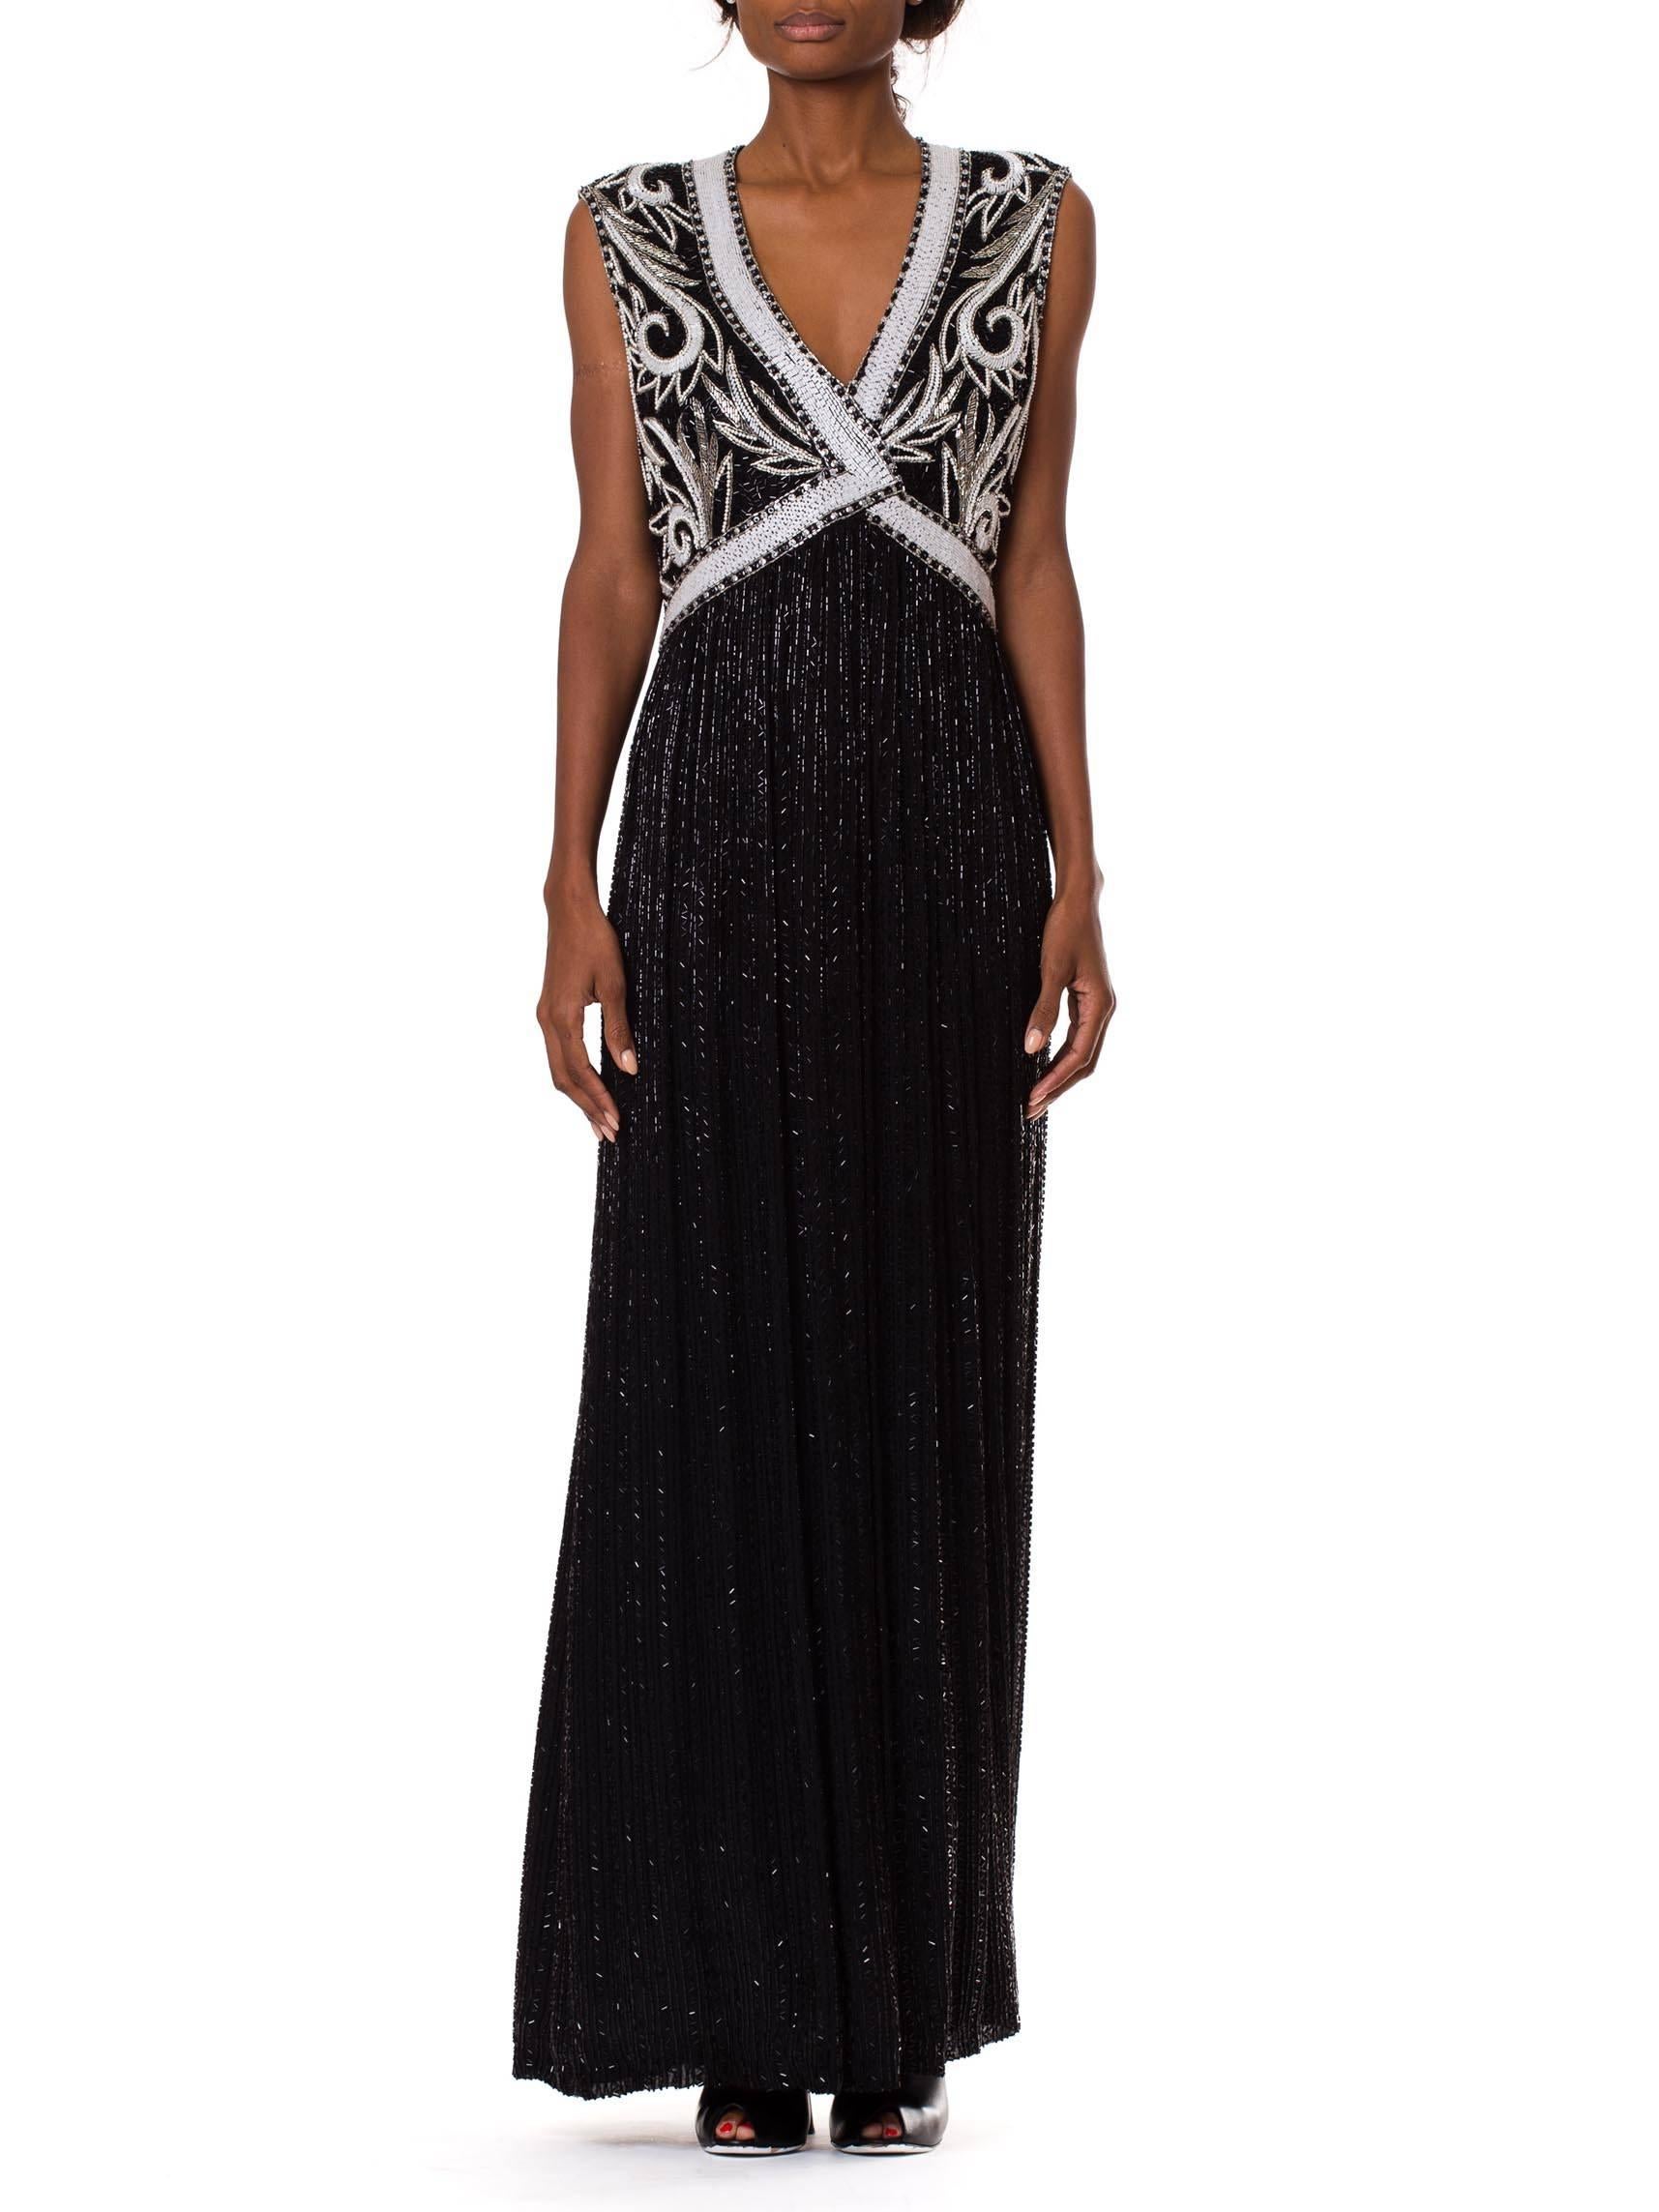 This absolutely stunning Bob Mackie evening gown is as elegant as they come. The silhouette has a classic 1930s vibe, with a glittering black skirt and a vest-like bodice encrusted in intricate beadwork. The monochromatic black and white scheme